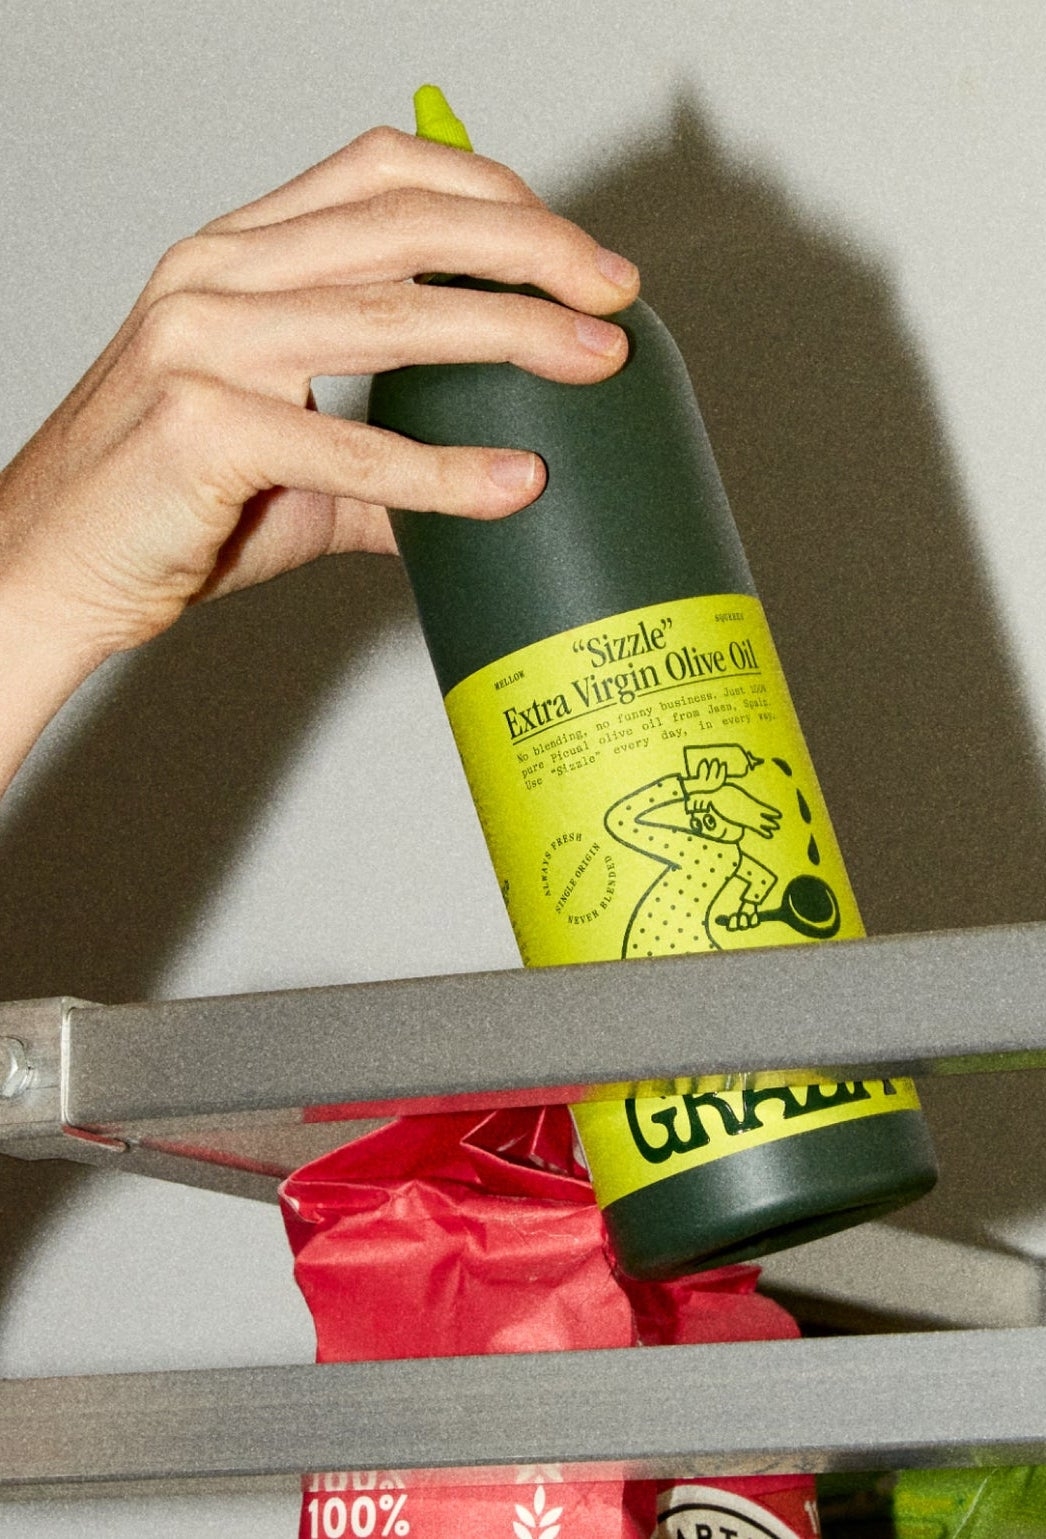 Graza squeeze bottle being grabbed from top shelf in a commercial kitchen